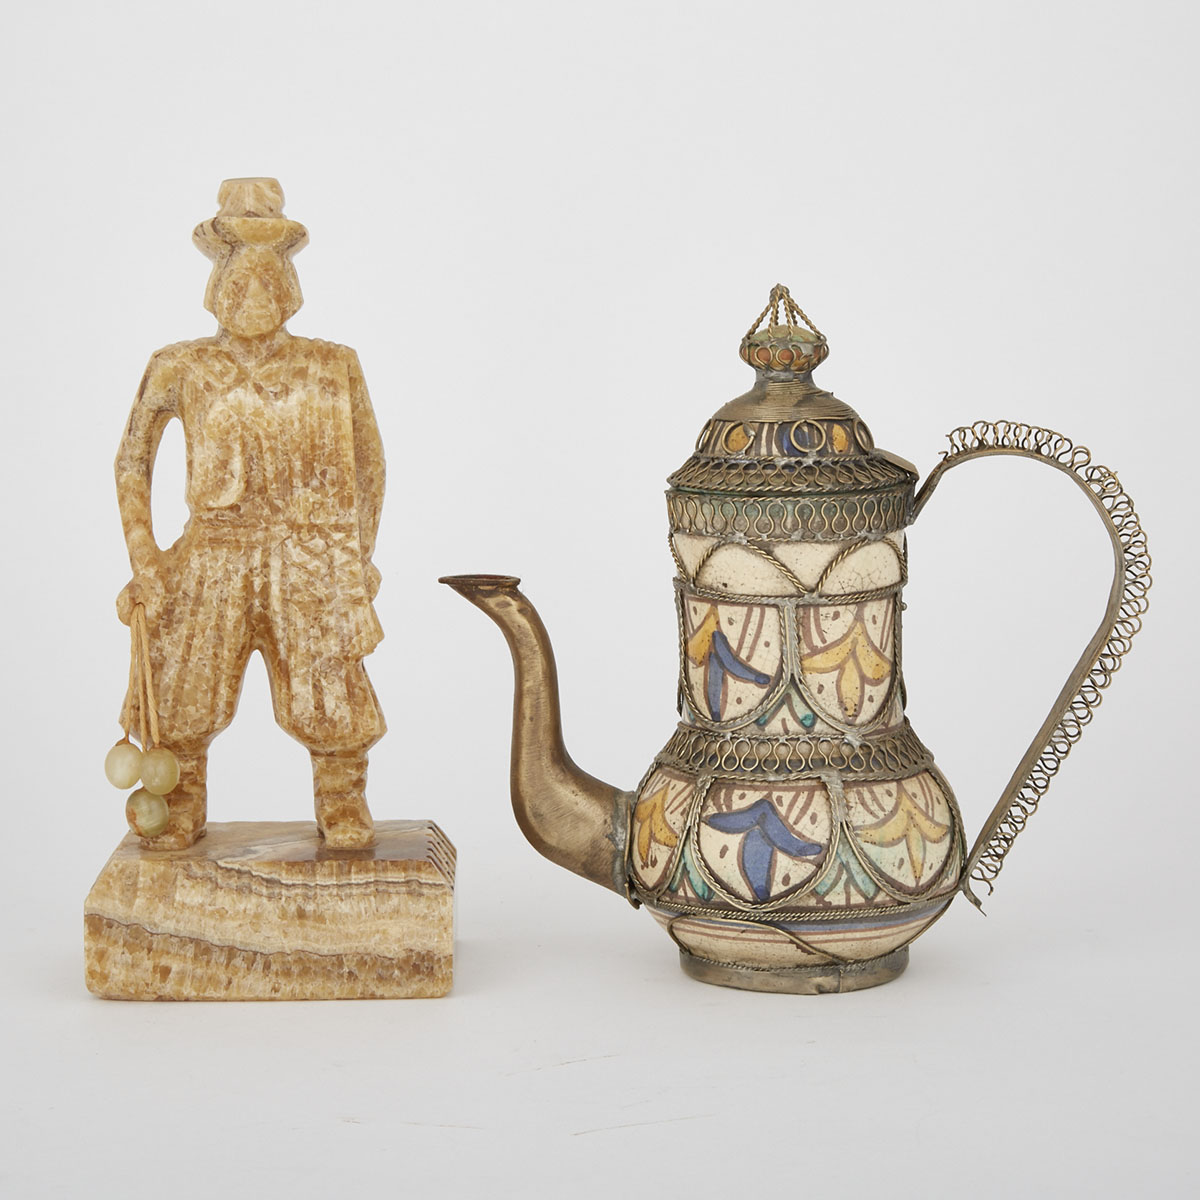 Two Persian Pieces, Early 20th Century and Later